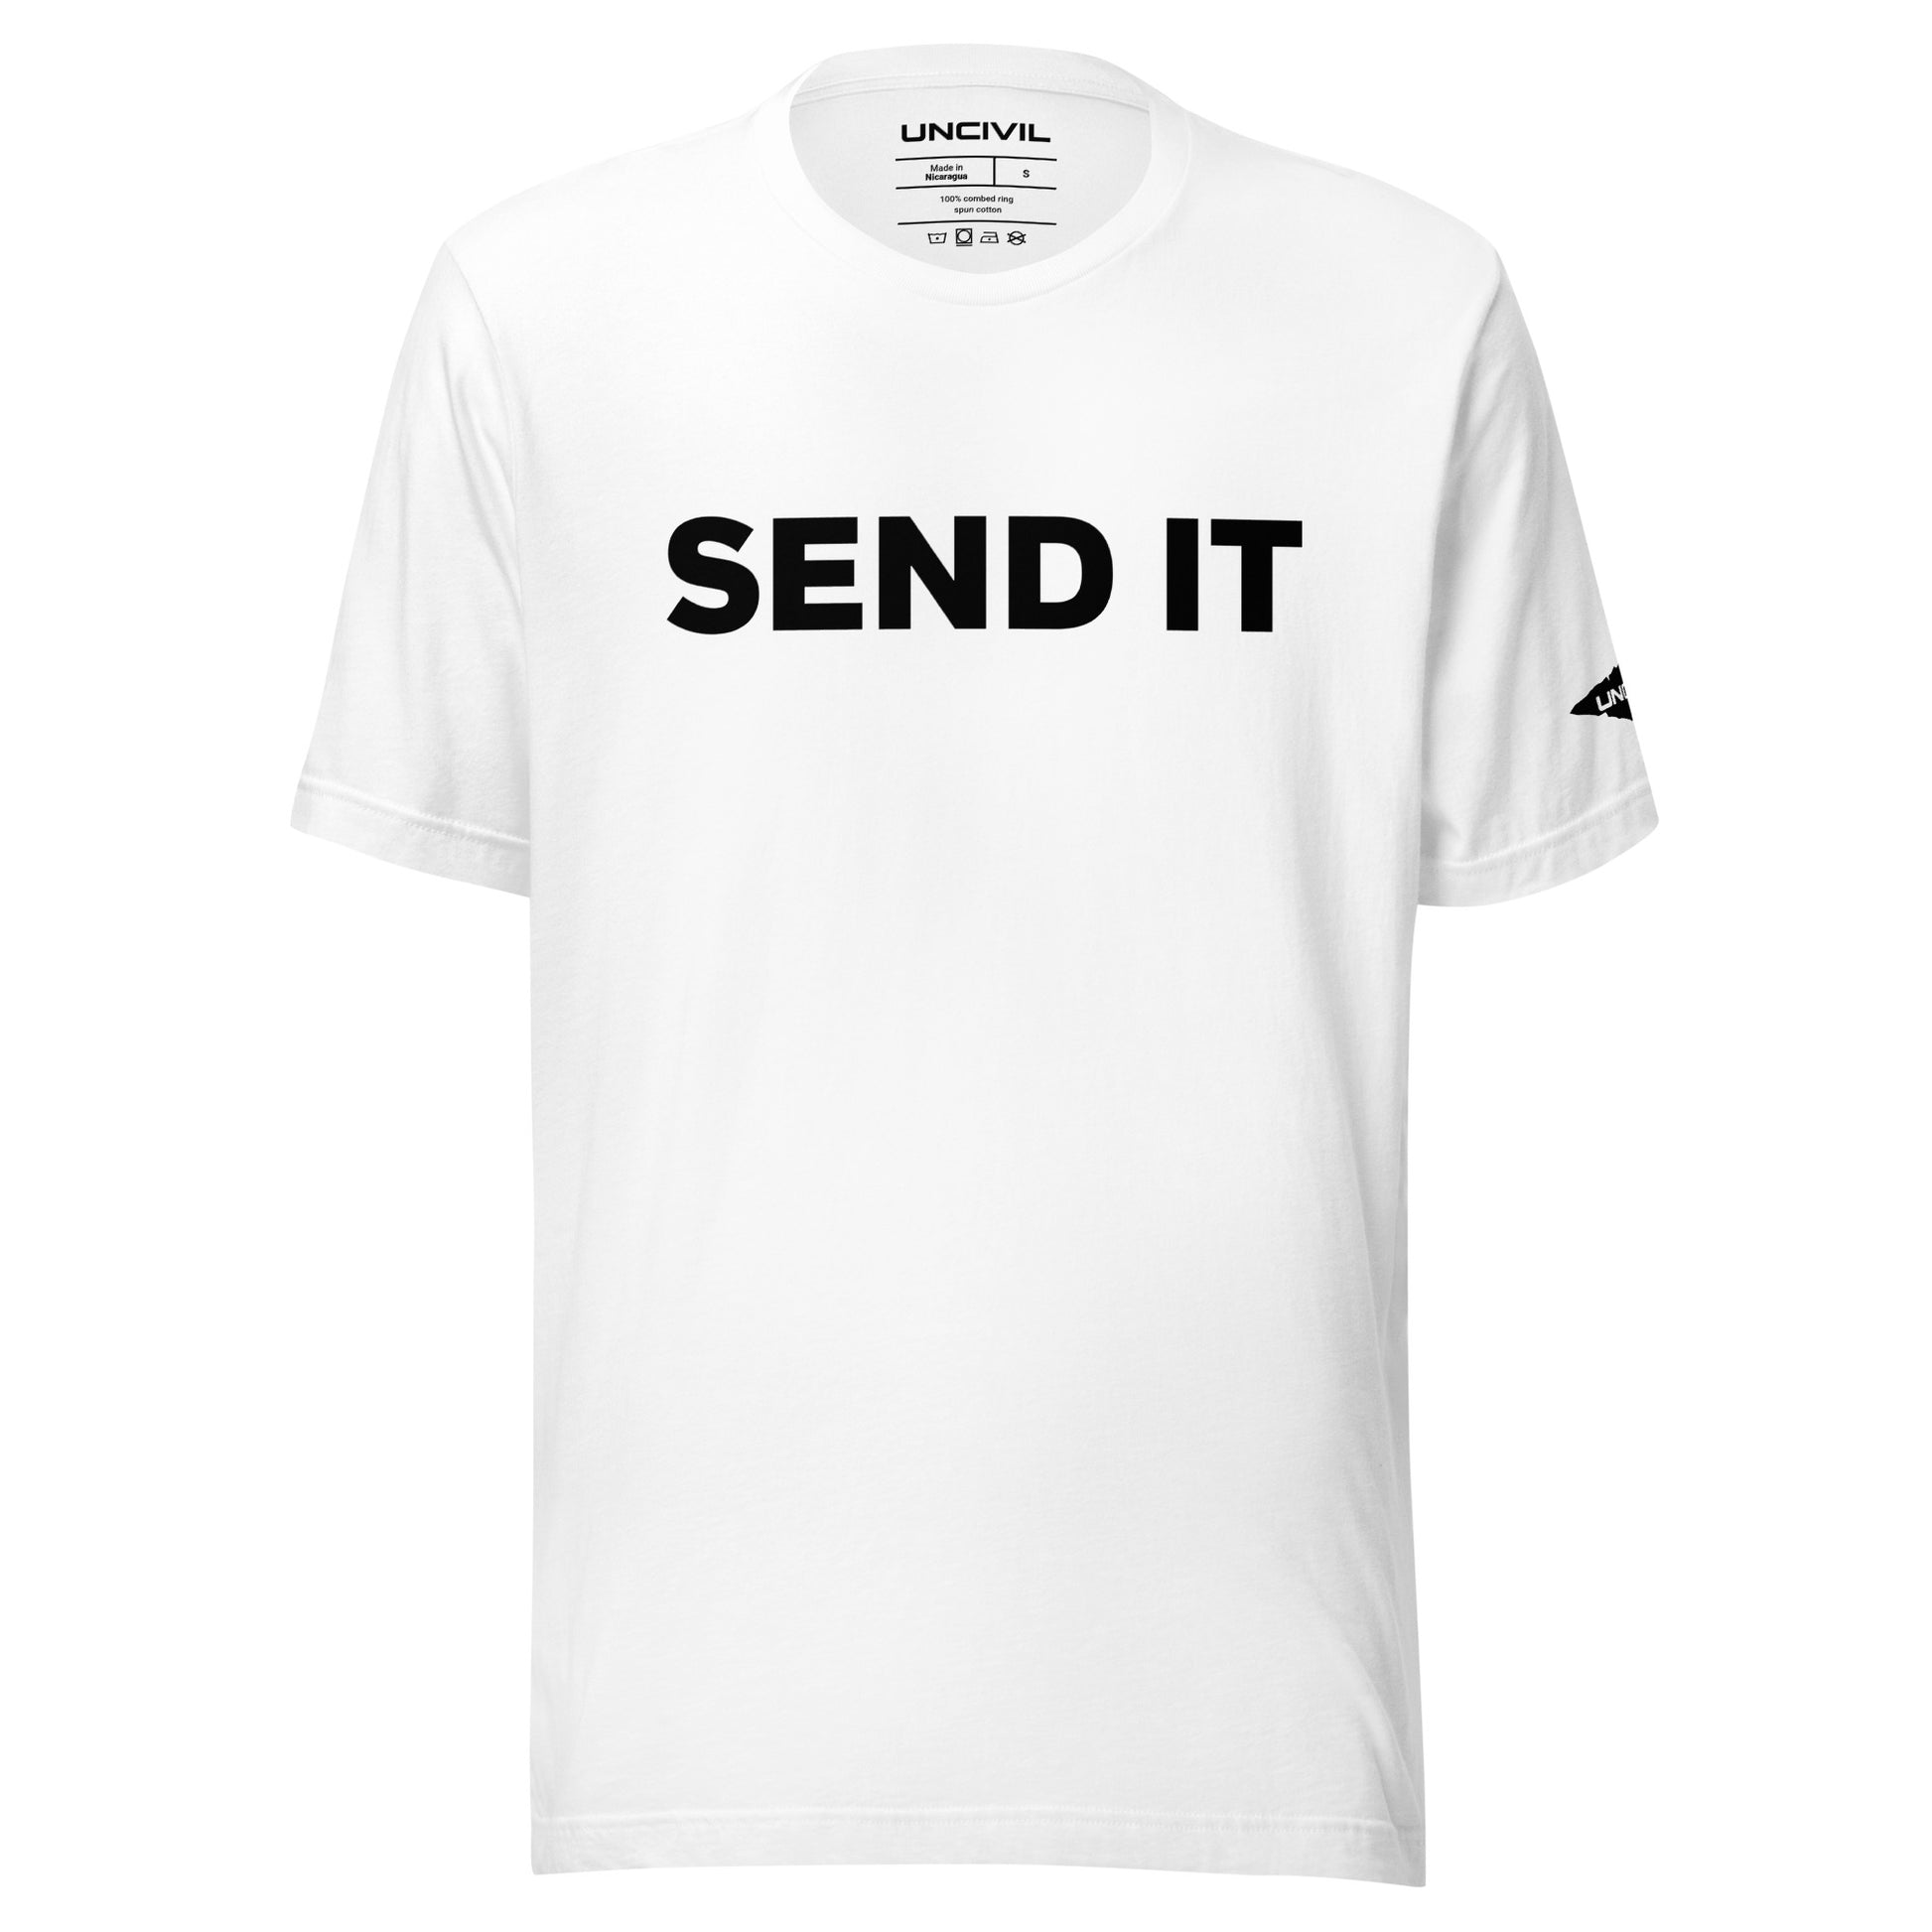 Send It is often used as an expression to indicate taking action or proceeding with a plan. White men's shirt.